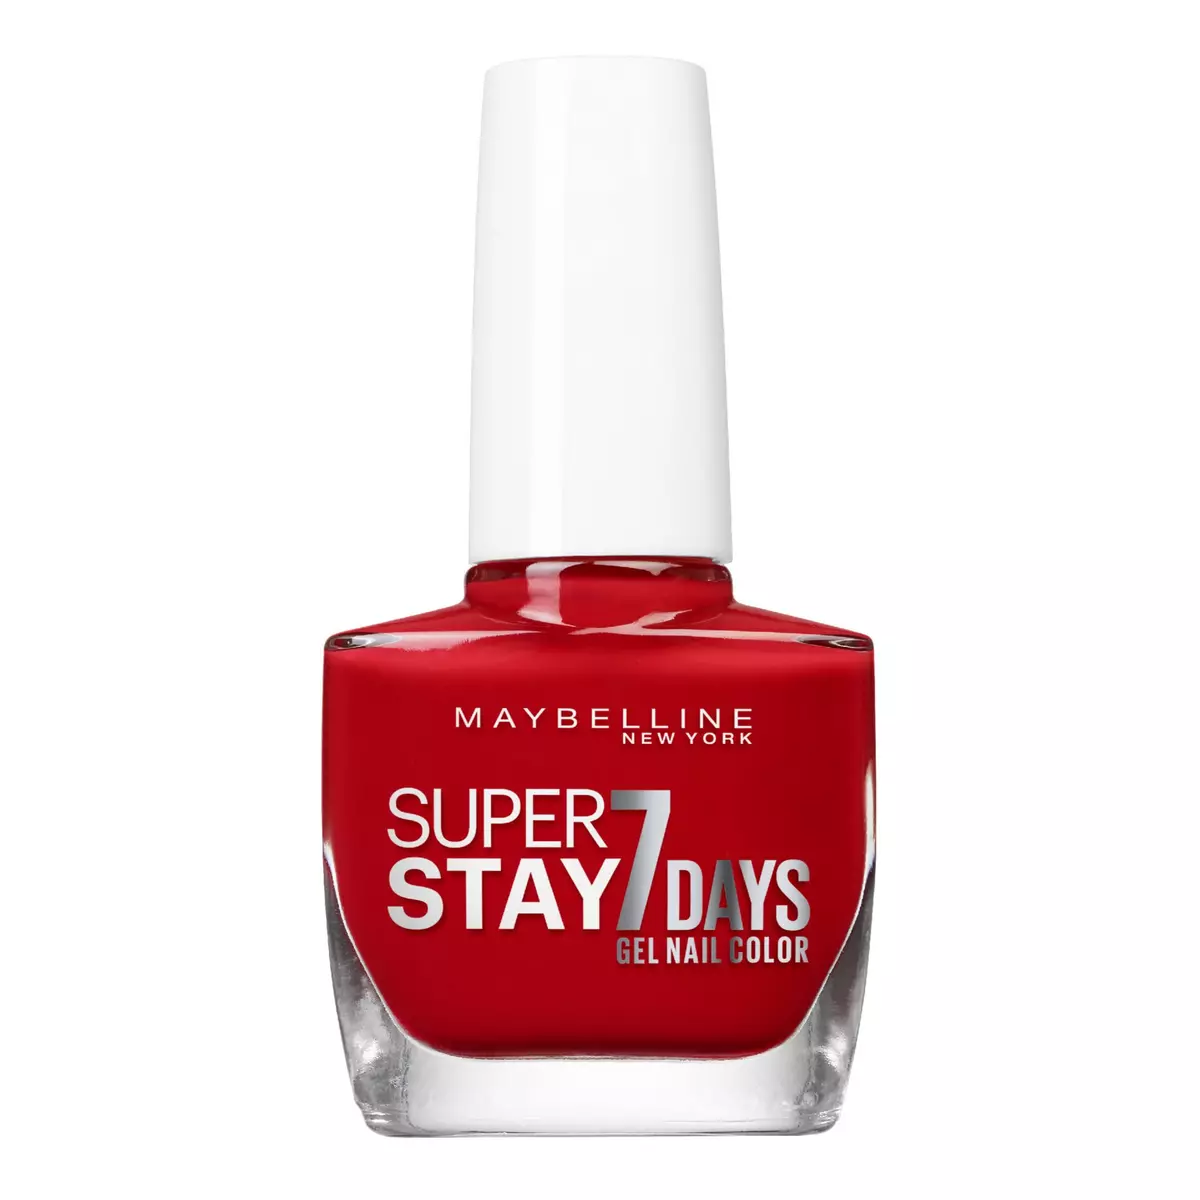 MAYBELLINE Superstay 7 Days Vernis à ongles 08 rouge passion 1 pièce